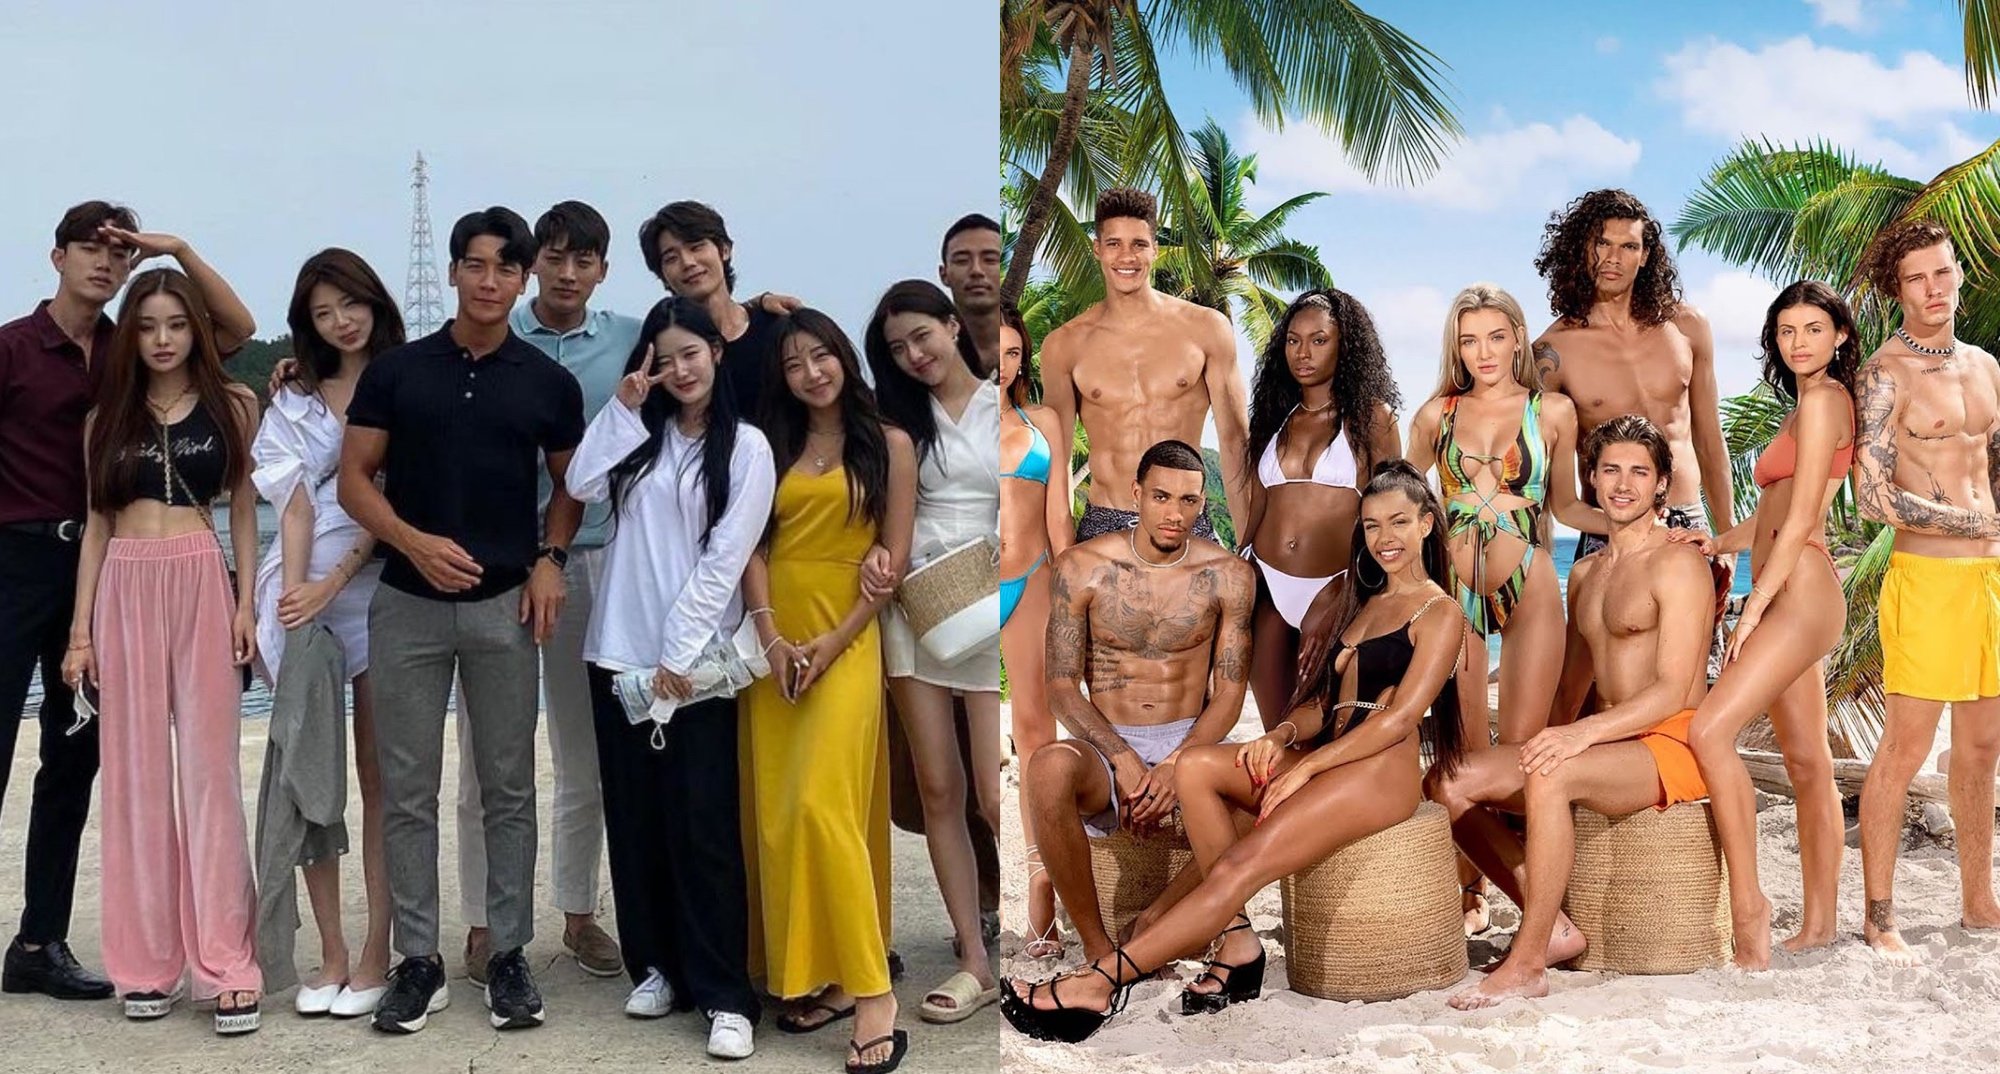 'Single's Inferno' and 'Too Hot to Handle' cast members in group photos.